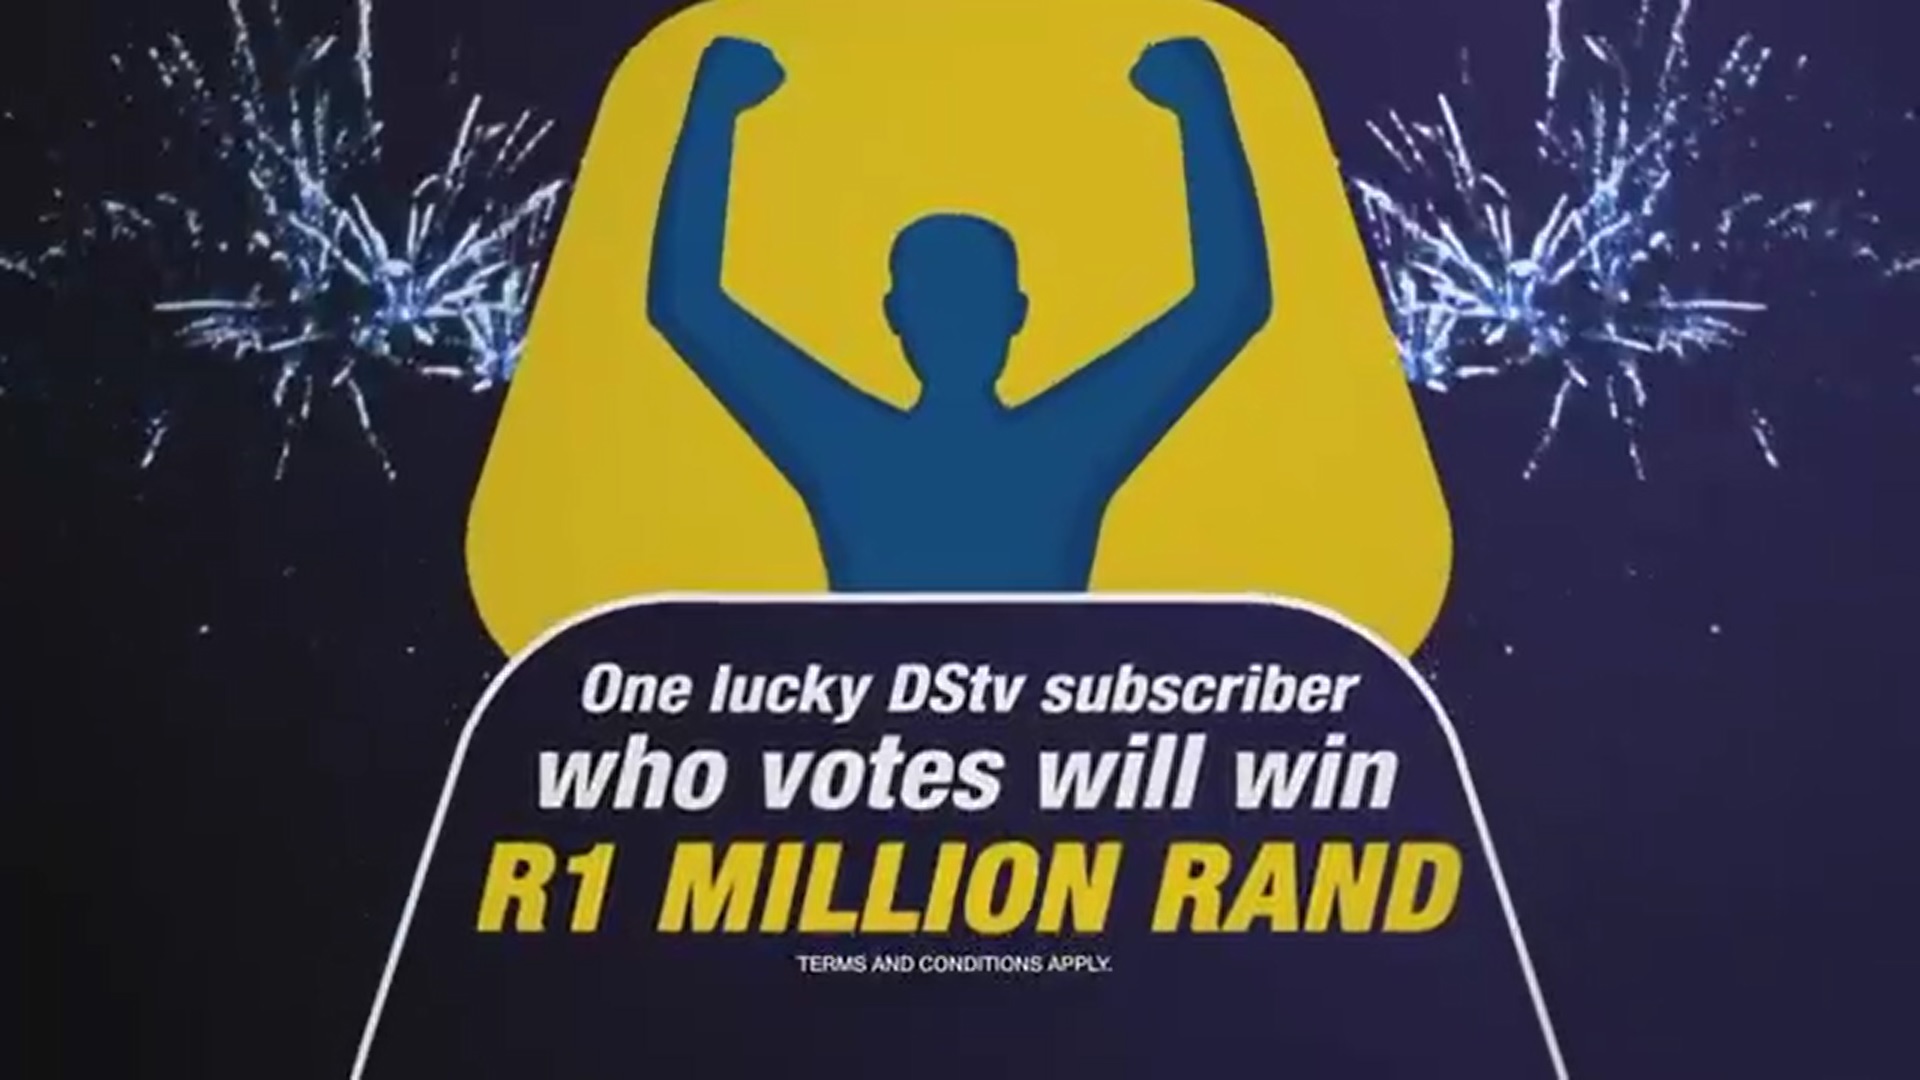 DStv Compact Cup | Promo | 1 DStv Subscriber will win 1 Million rand